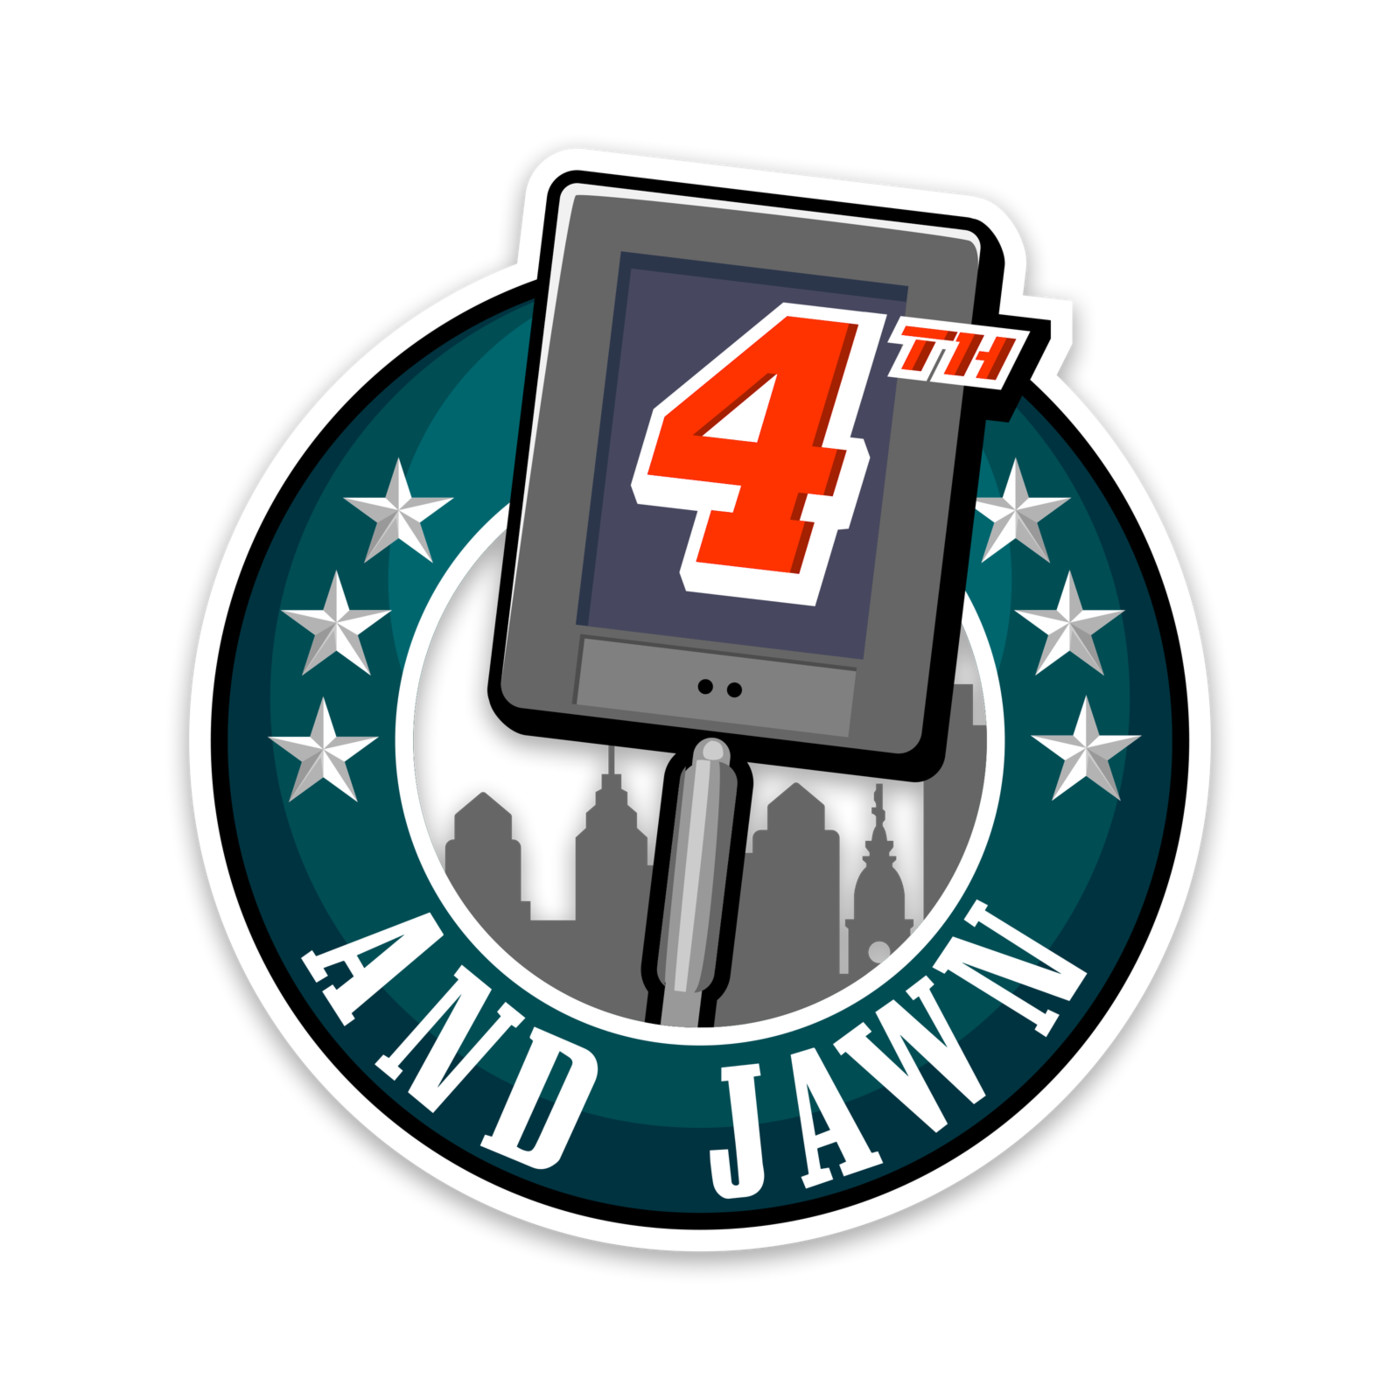 4th and Jawn - Episode 206 - A Look at the Cornerbacks